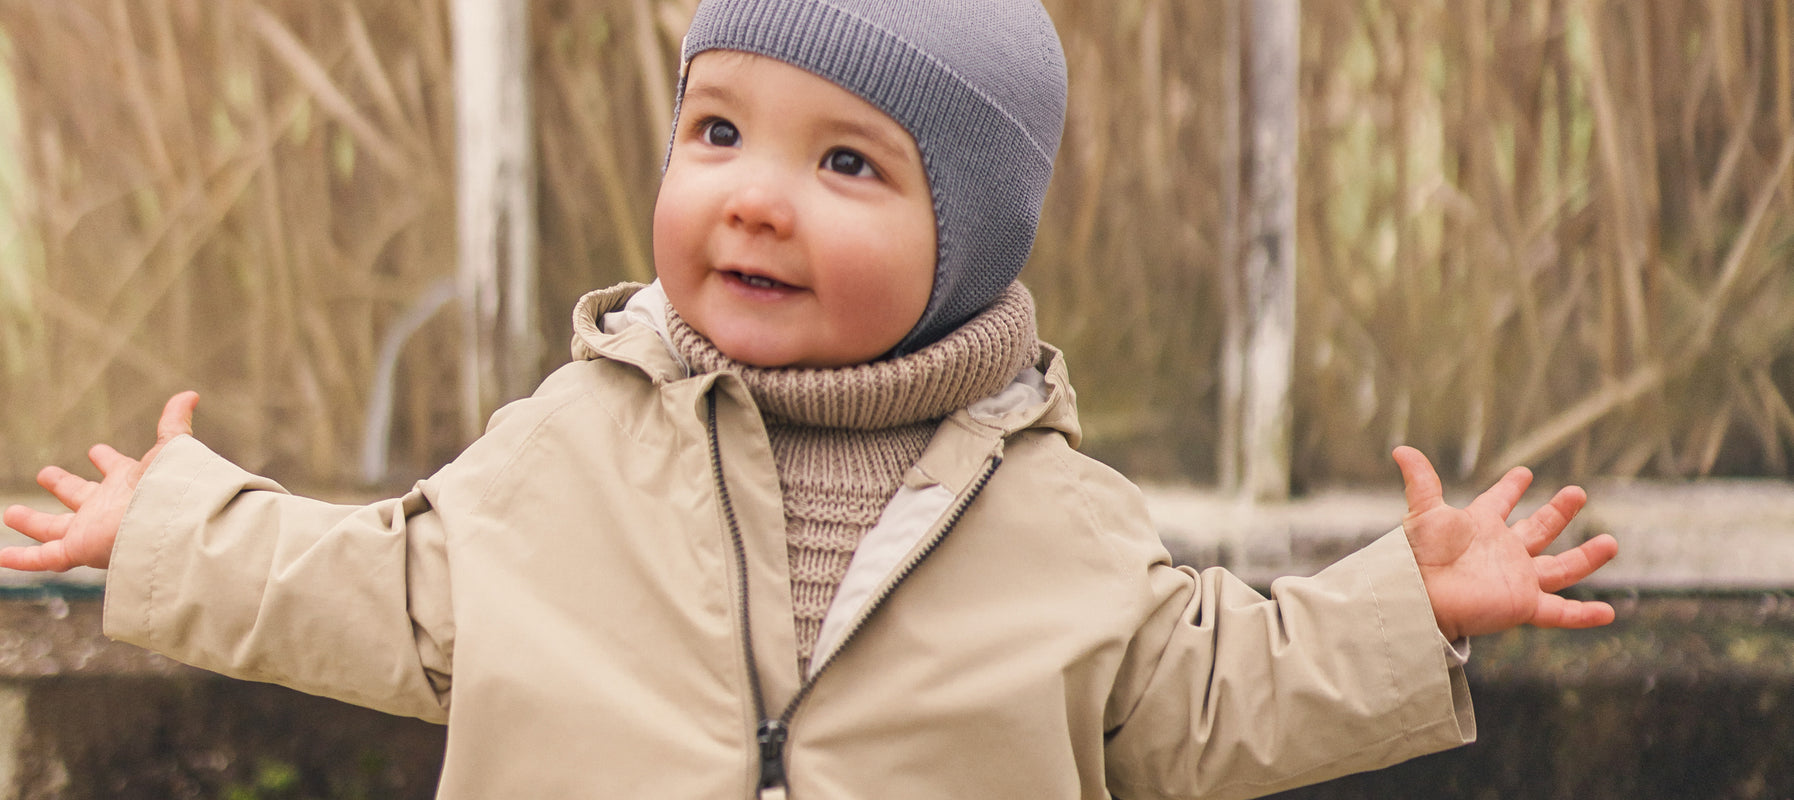 Outerwear for the little ones